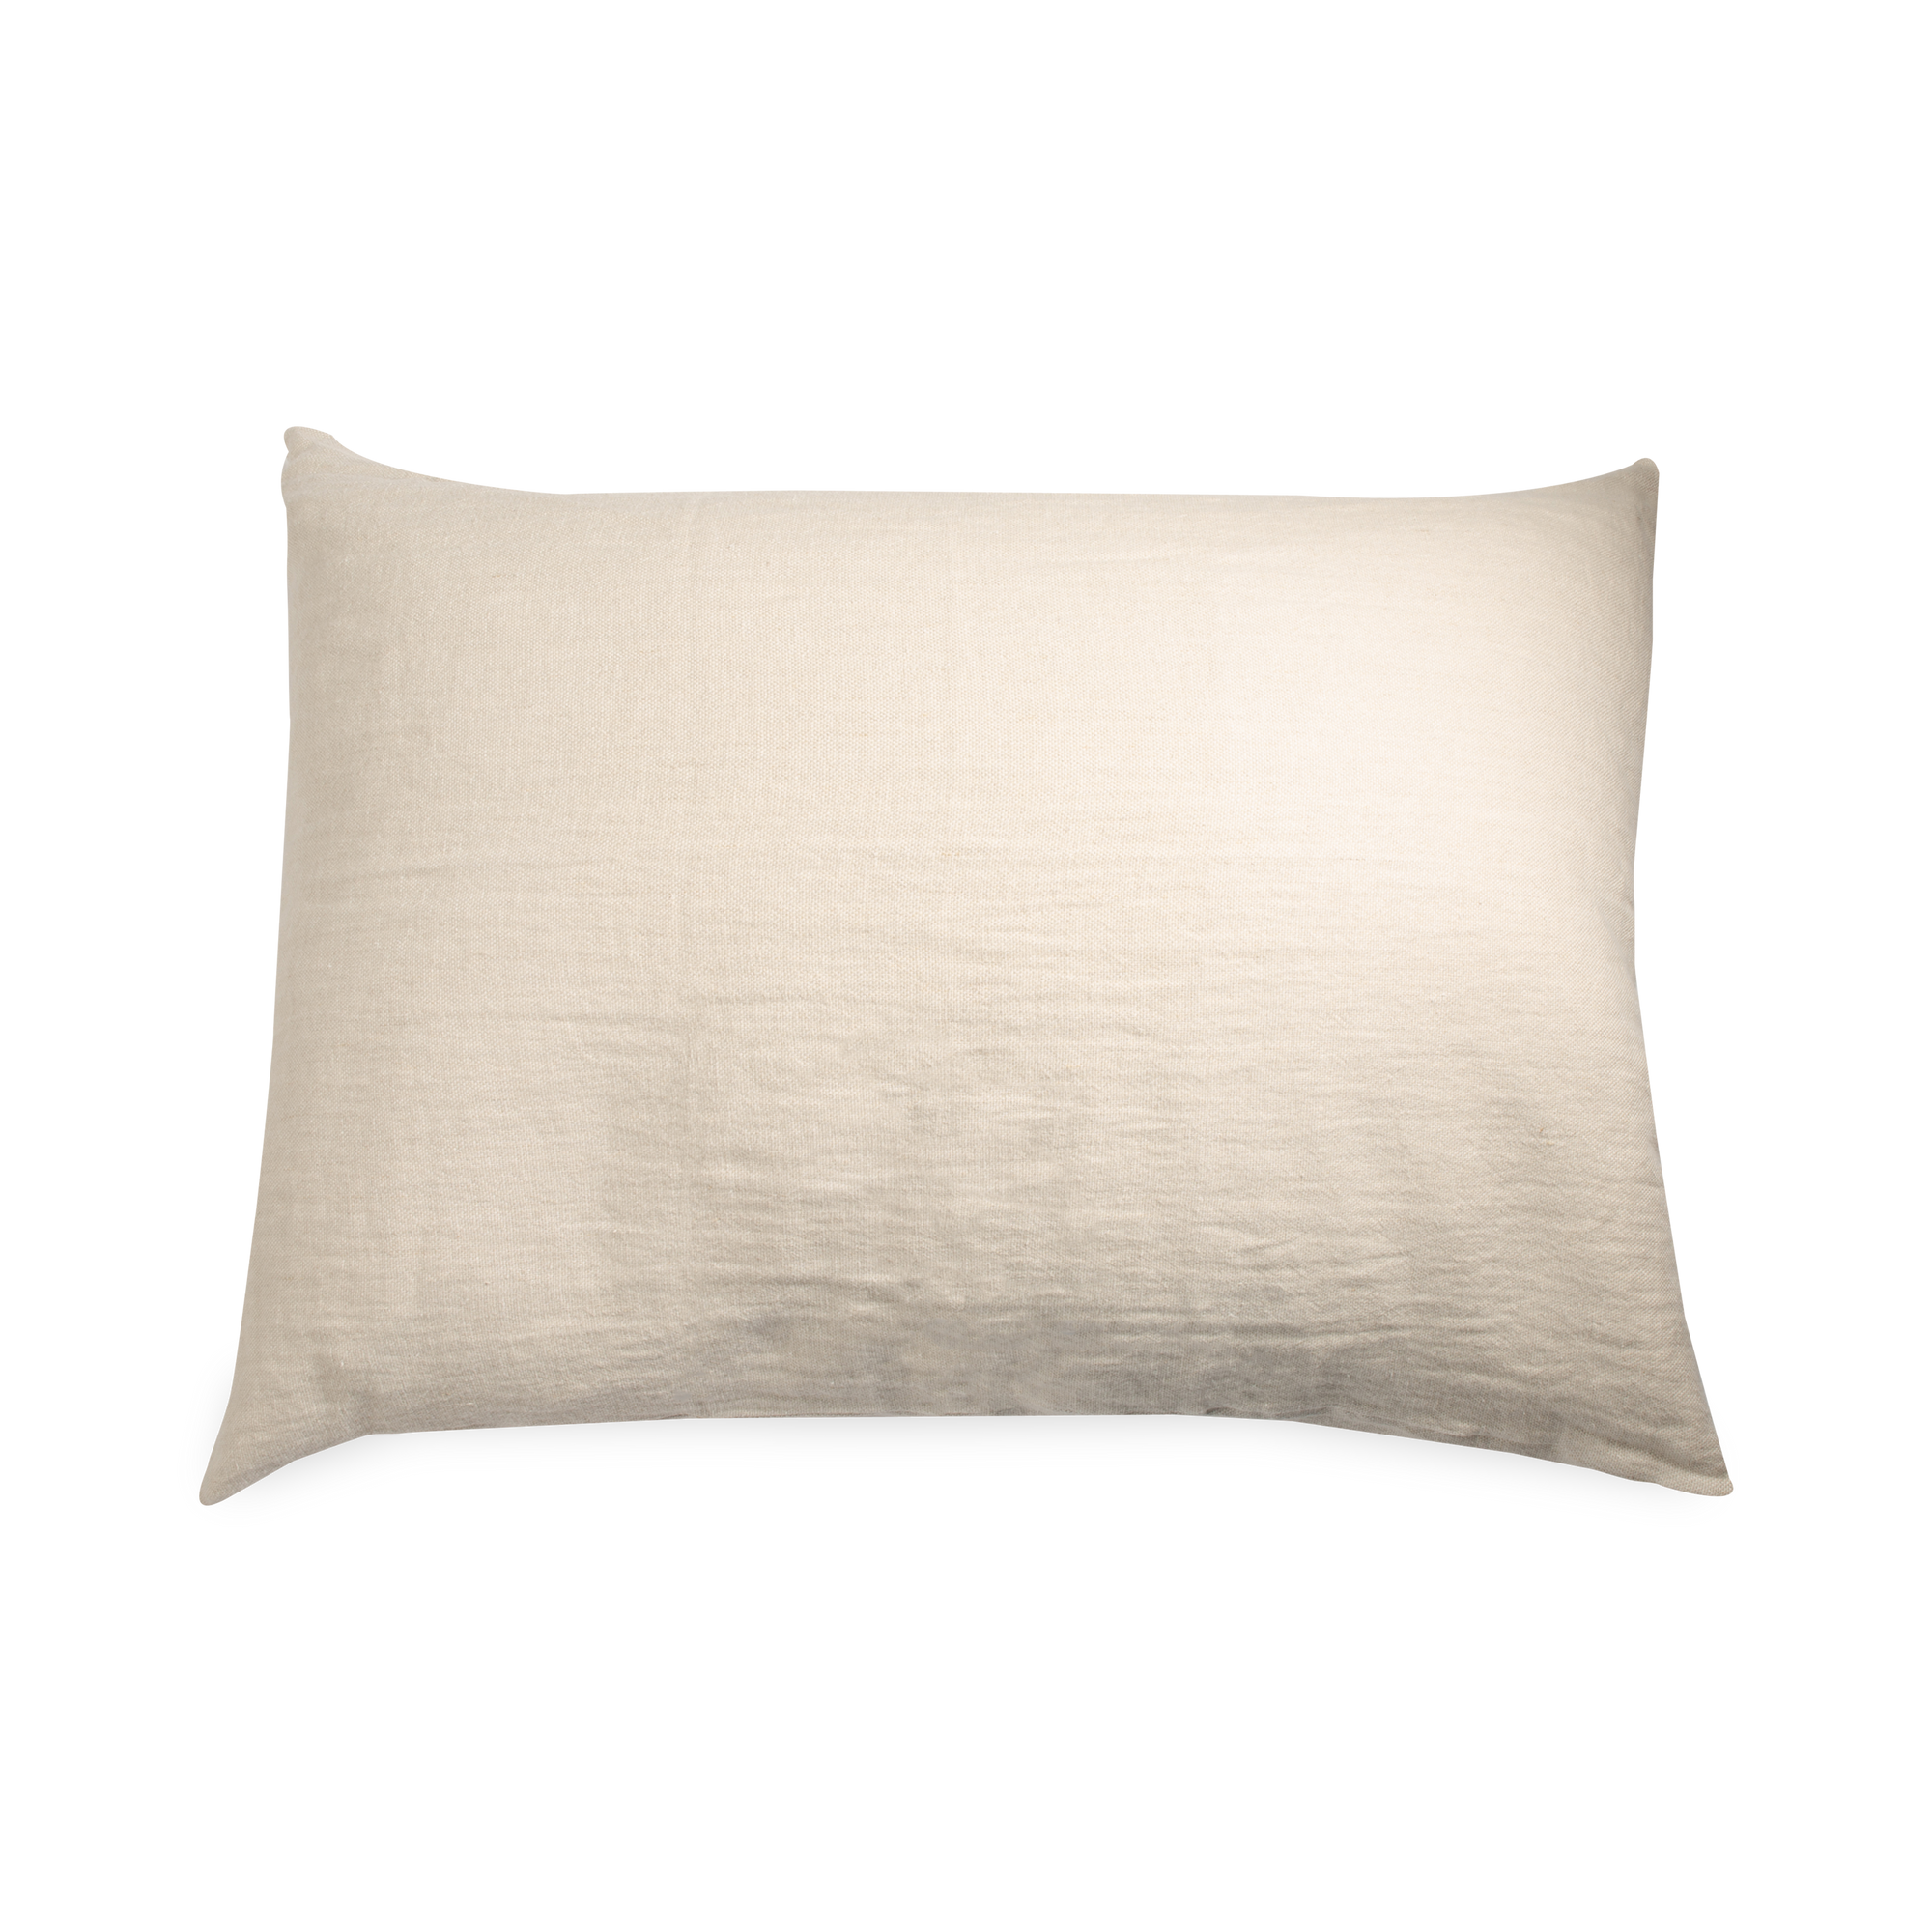 The Vintage Linen Pillow is made from premium Panama linen which is a heavy basket weave.